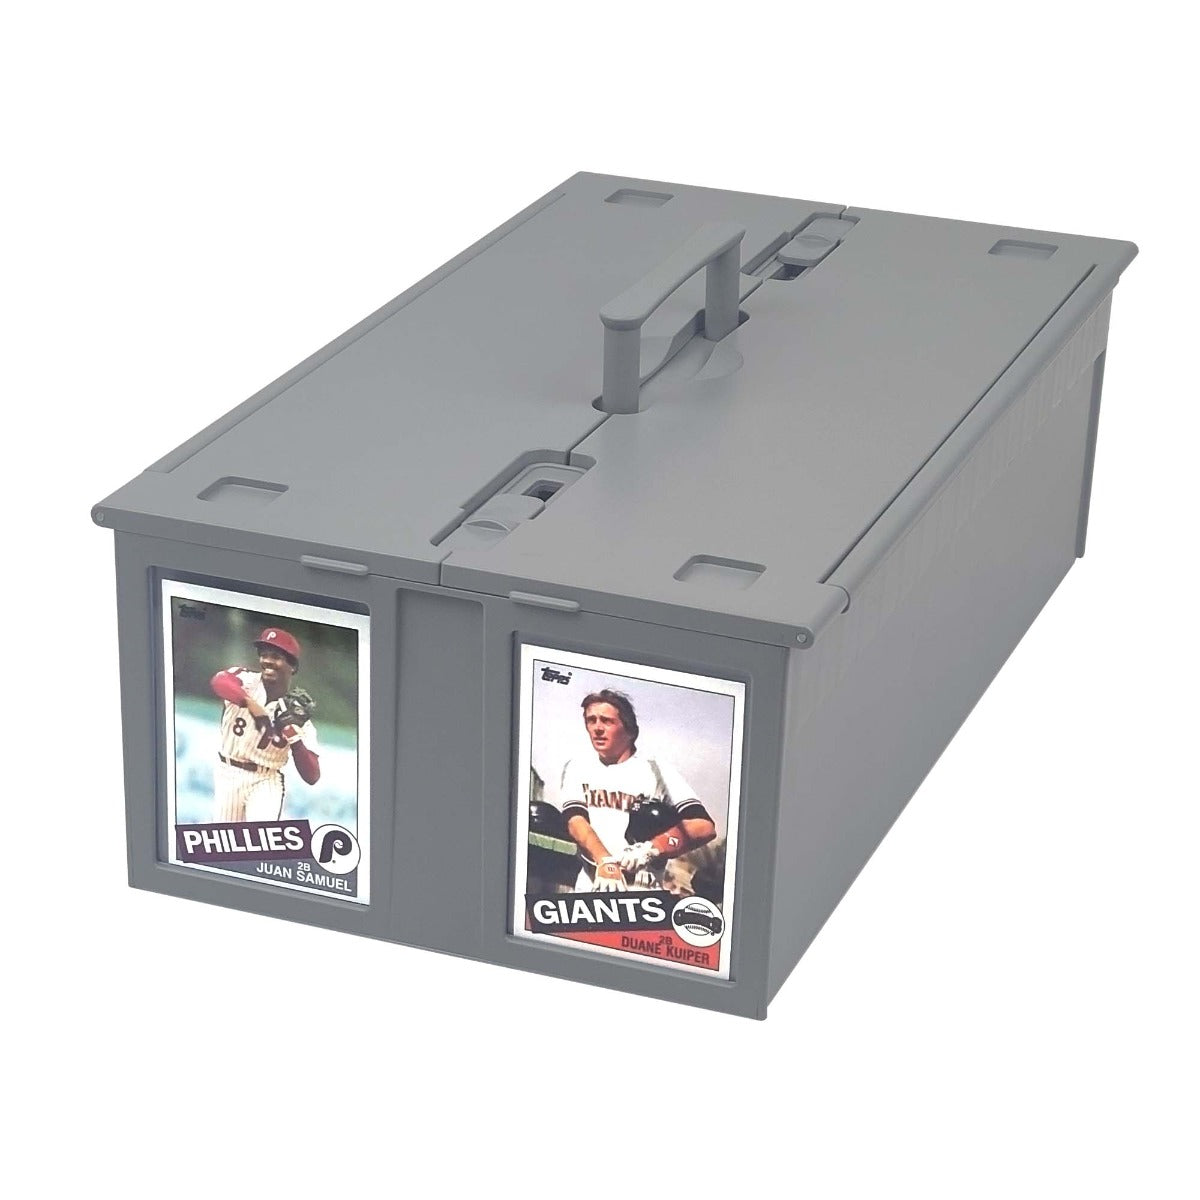 Card Storage Box in gray color fits 1600 sports cards - Closed Box Lid and Locked with Handle Elevated ready for carrying (1-ccb-1600-g-gry)